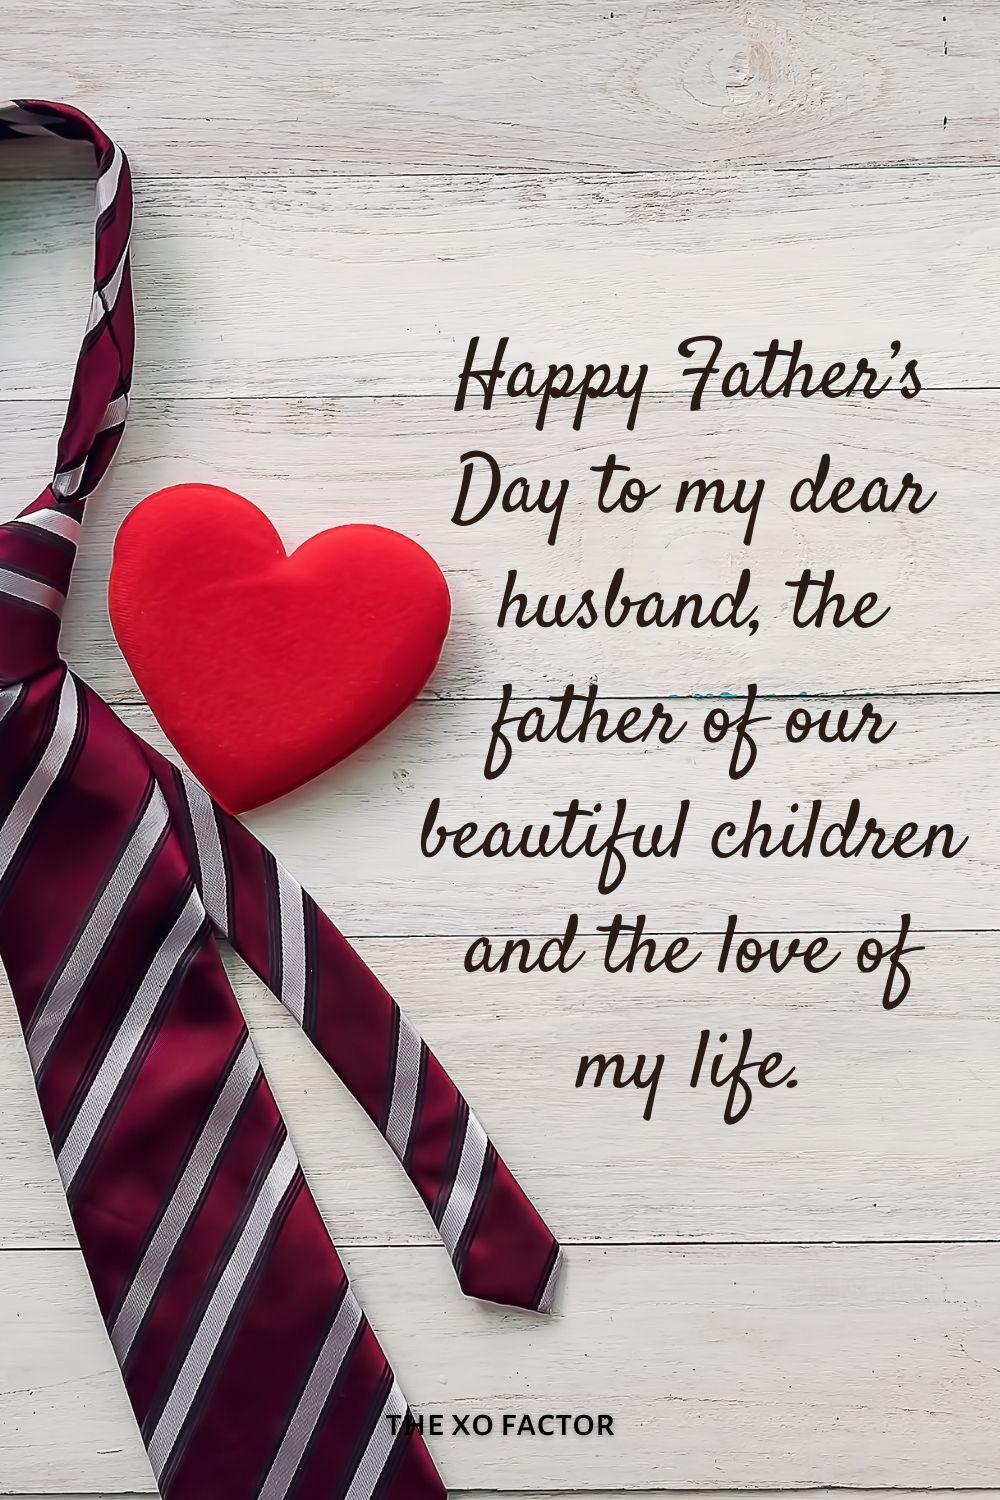 Happy Father’s Day to my dear husband, the father of our beautiful children and the love of my life.